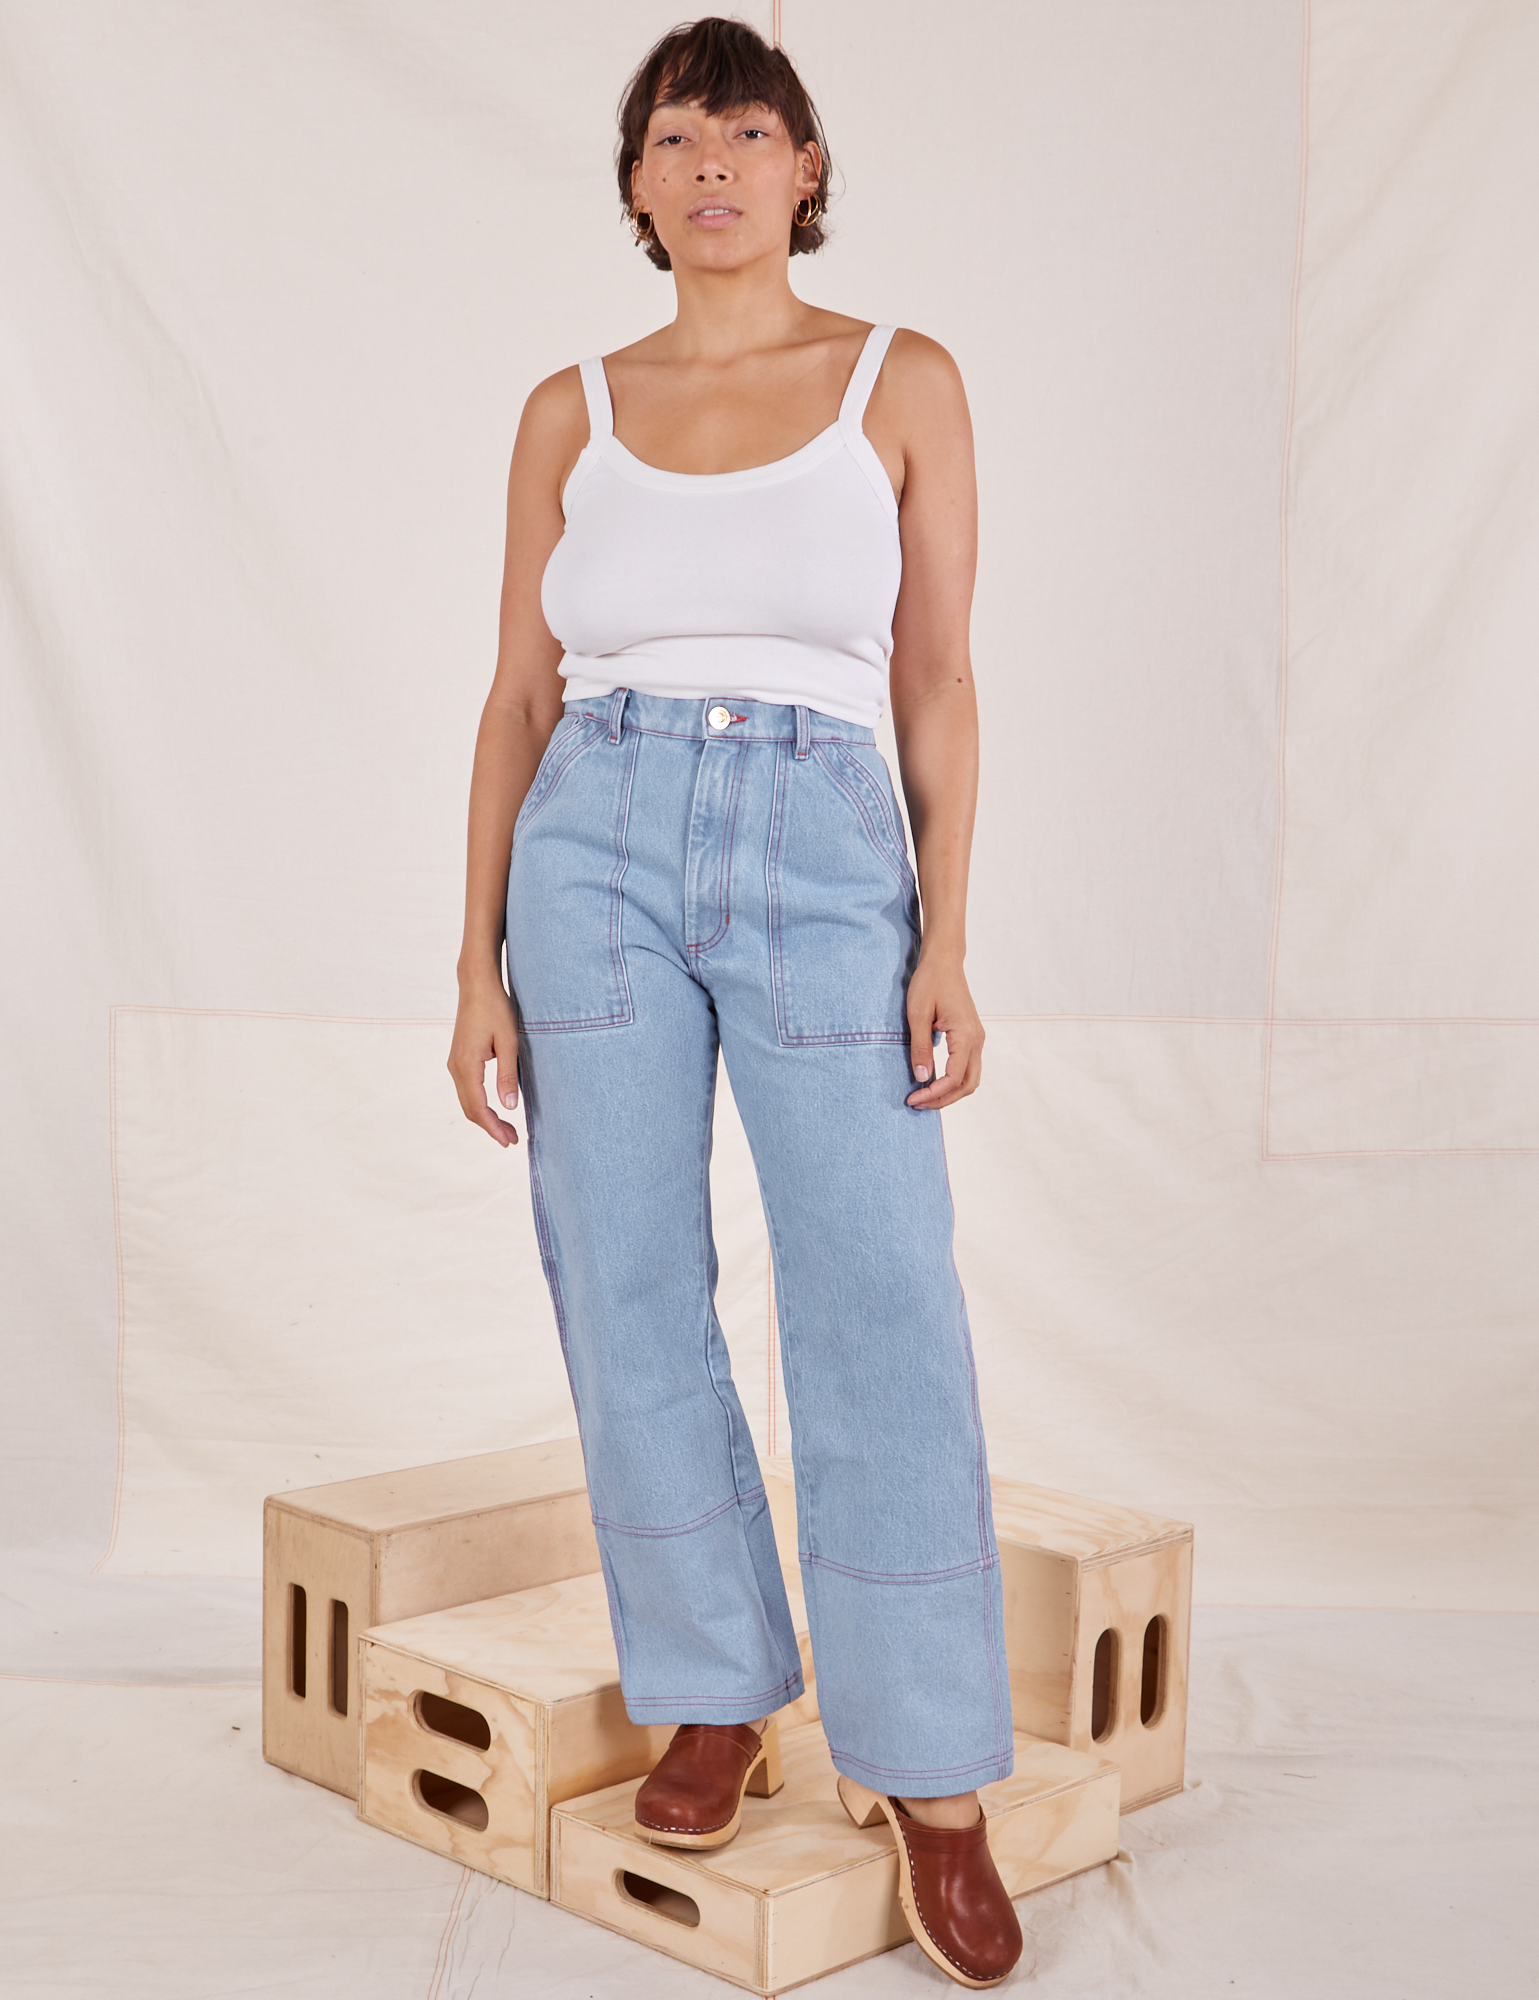 Tiara is wearing Carpenter Jeans in Light Wash and Cropped Cami in vintage tee off-white